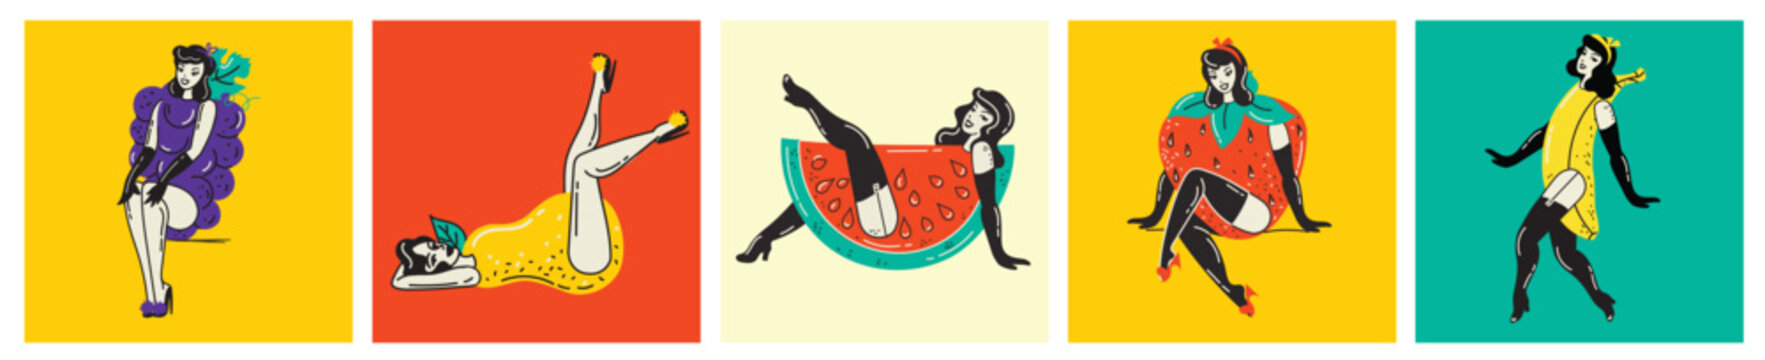 Beautiful young retro girls with fruits costume. Hot summer concept for advertising. Poster, sticker templates Vector background in in groovy pin-up pop art retro comic style.